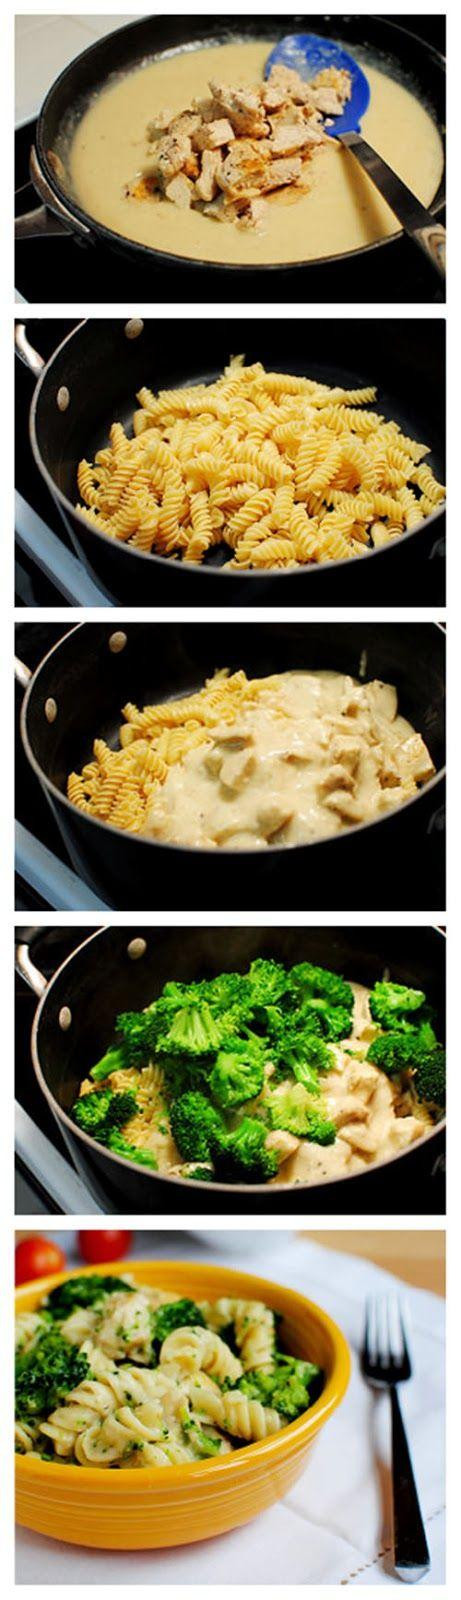 Chicken And Broccoli Recipes Low Calorie
 Skinny Chicken and Broccoli Alfredo Recipe